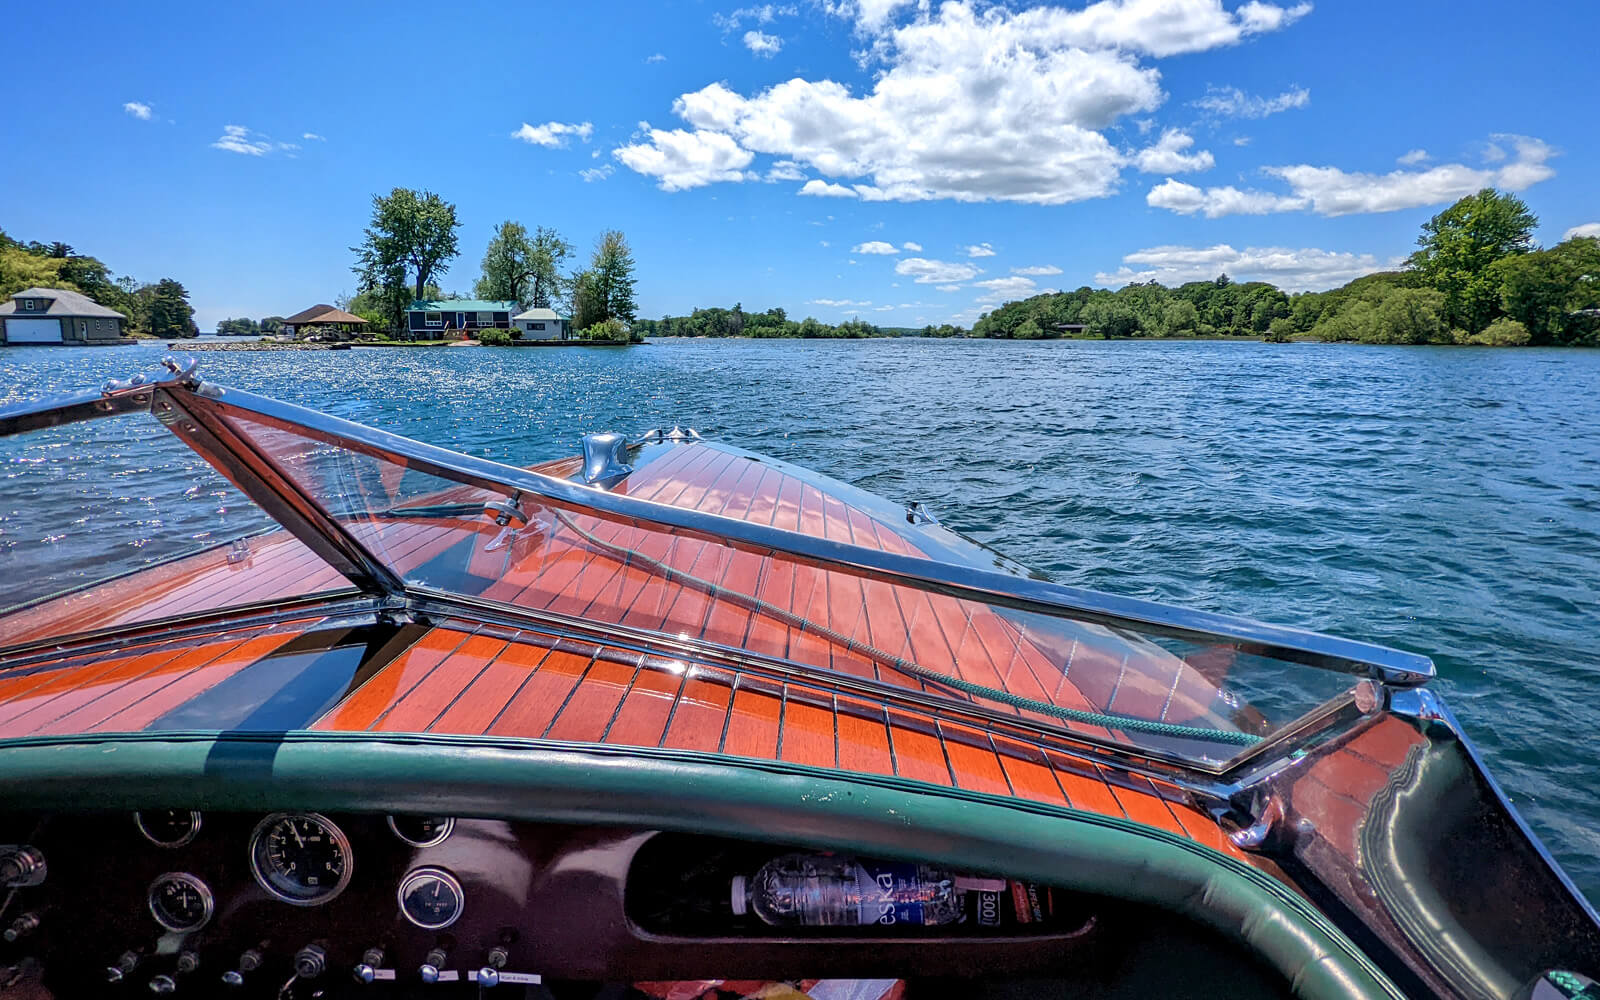 Thousand Islands Boat Museum Cruise :: I've Been Bit! Travel Blog